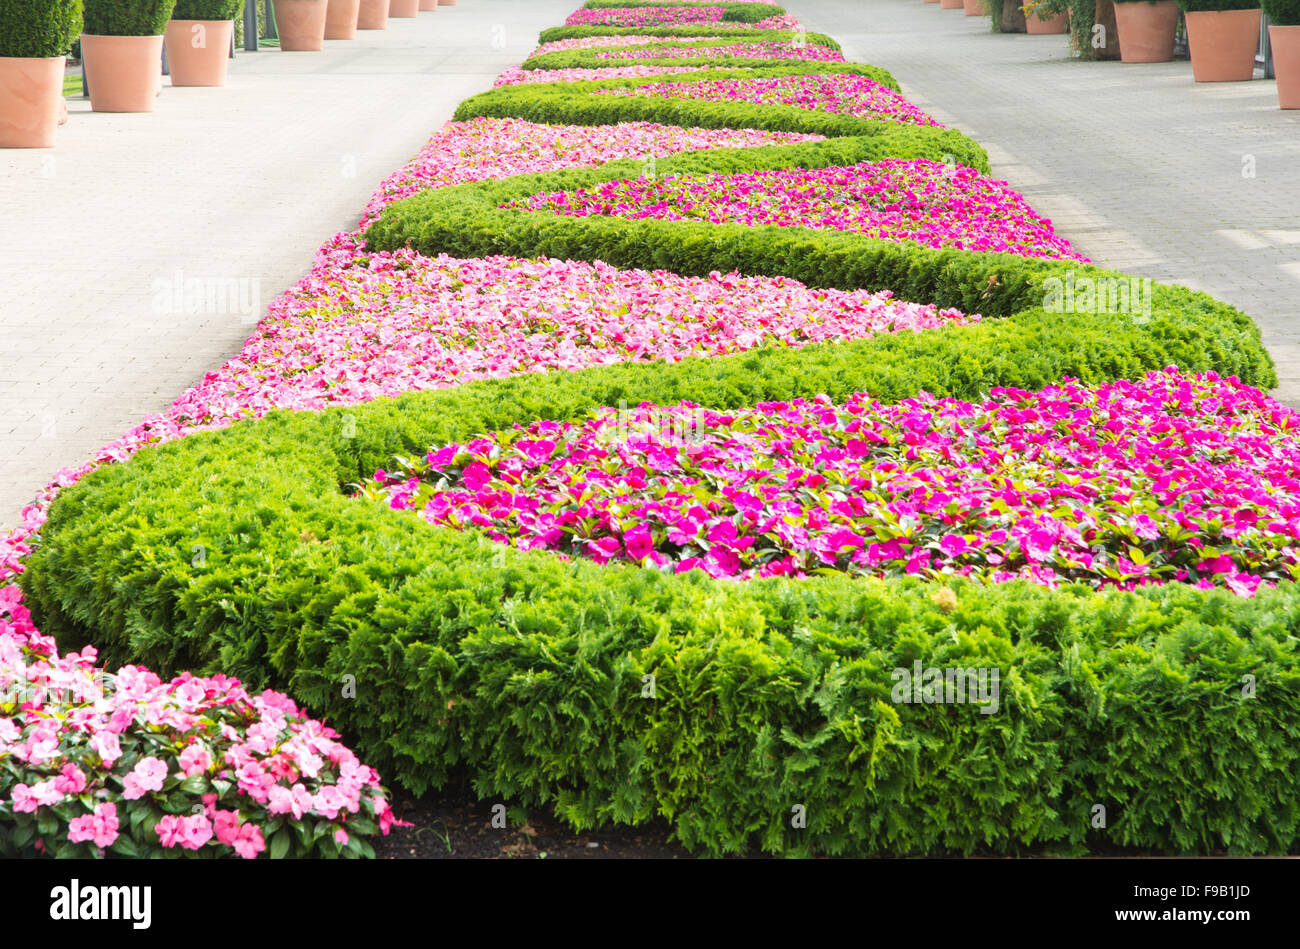 Flowerbed with a pattern forming a sinuous line. Stock Photo